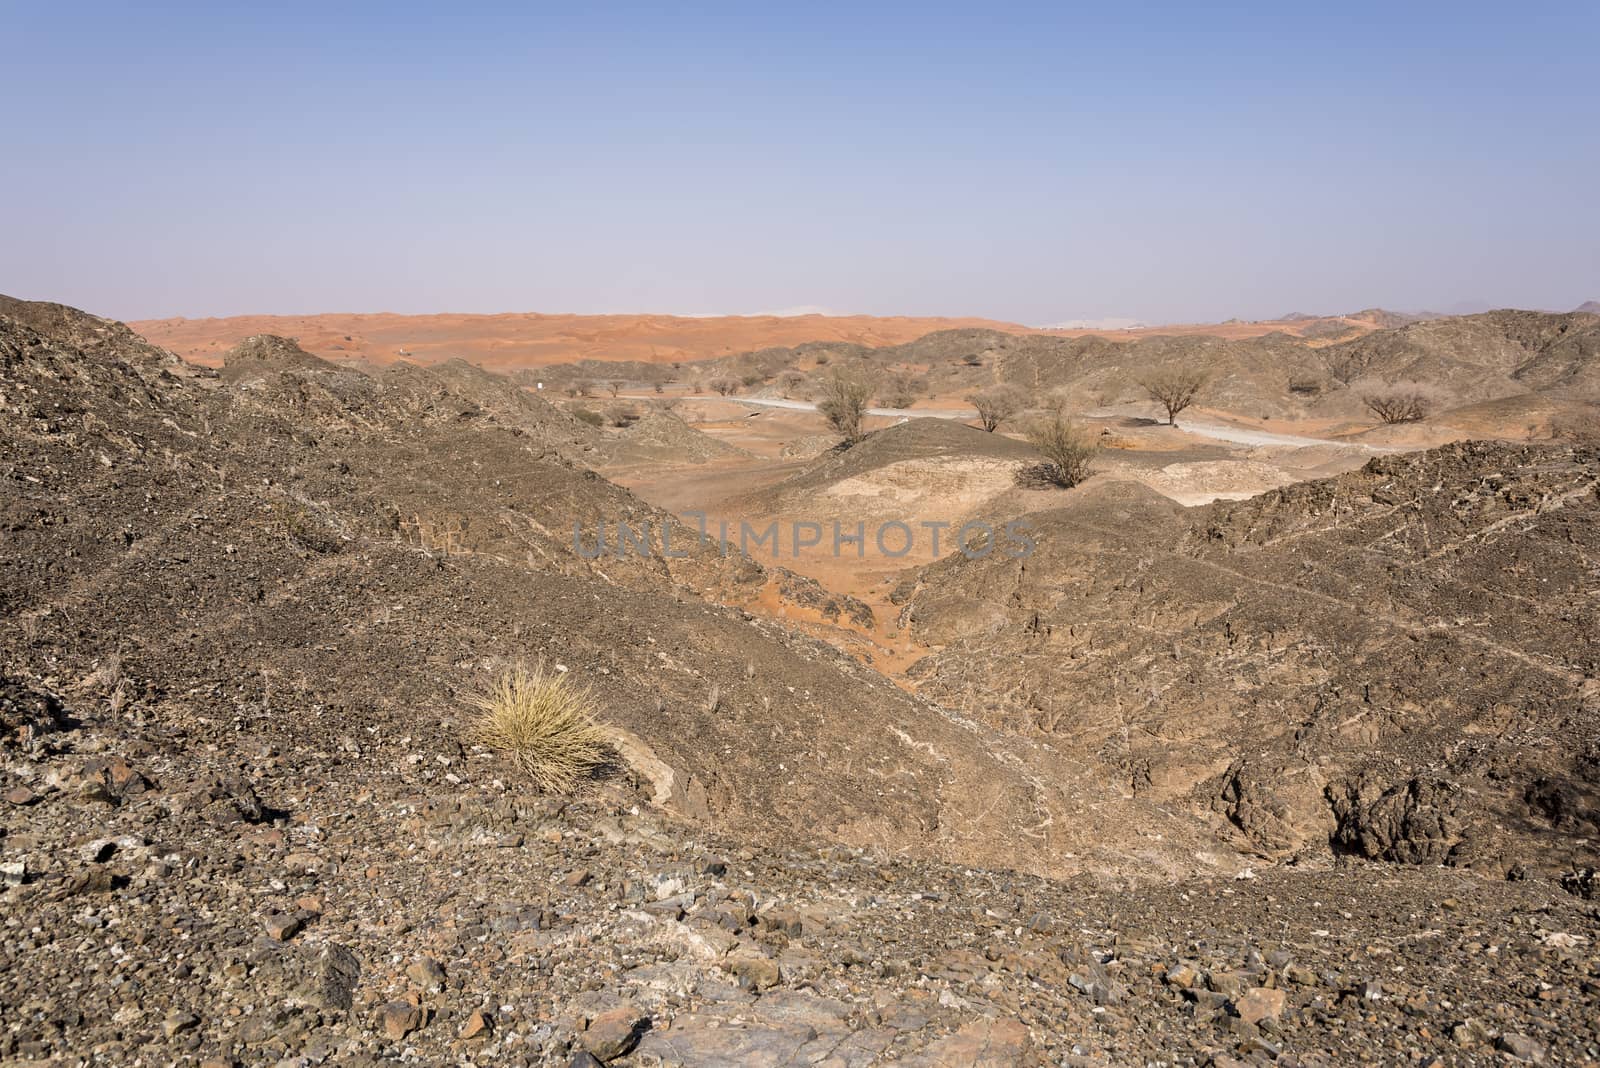 Scenic view of Wadi Al Ghail, with the mountain and the dunes. It is a village in between both desert (rocks and sand) and with amazing landscape all around
Ras al Khaimah Emirates, UAE